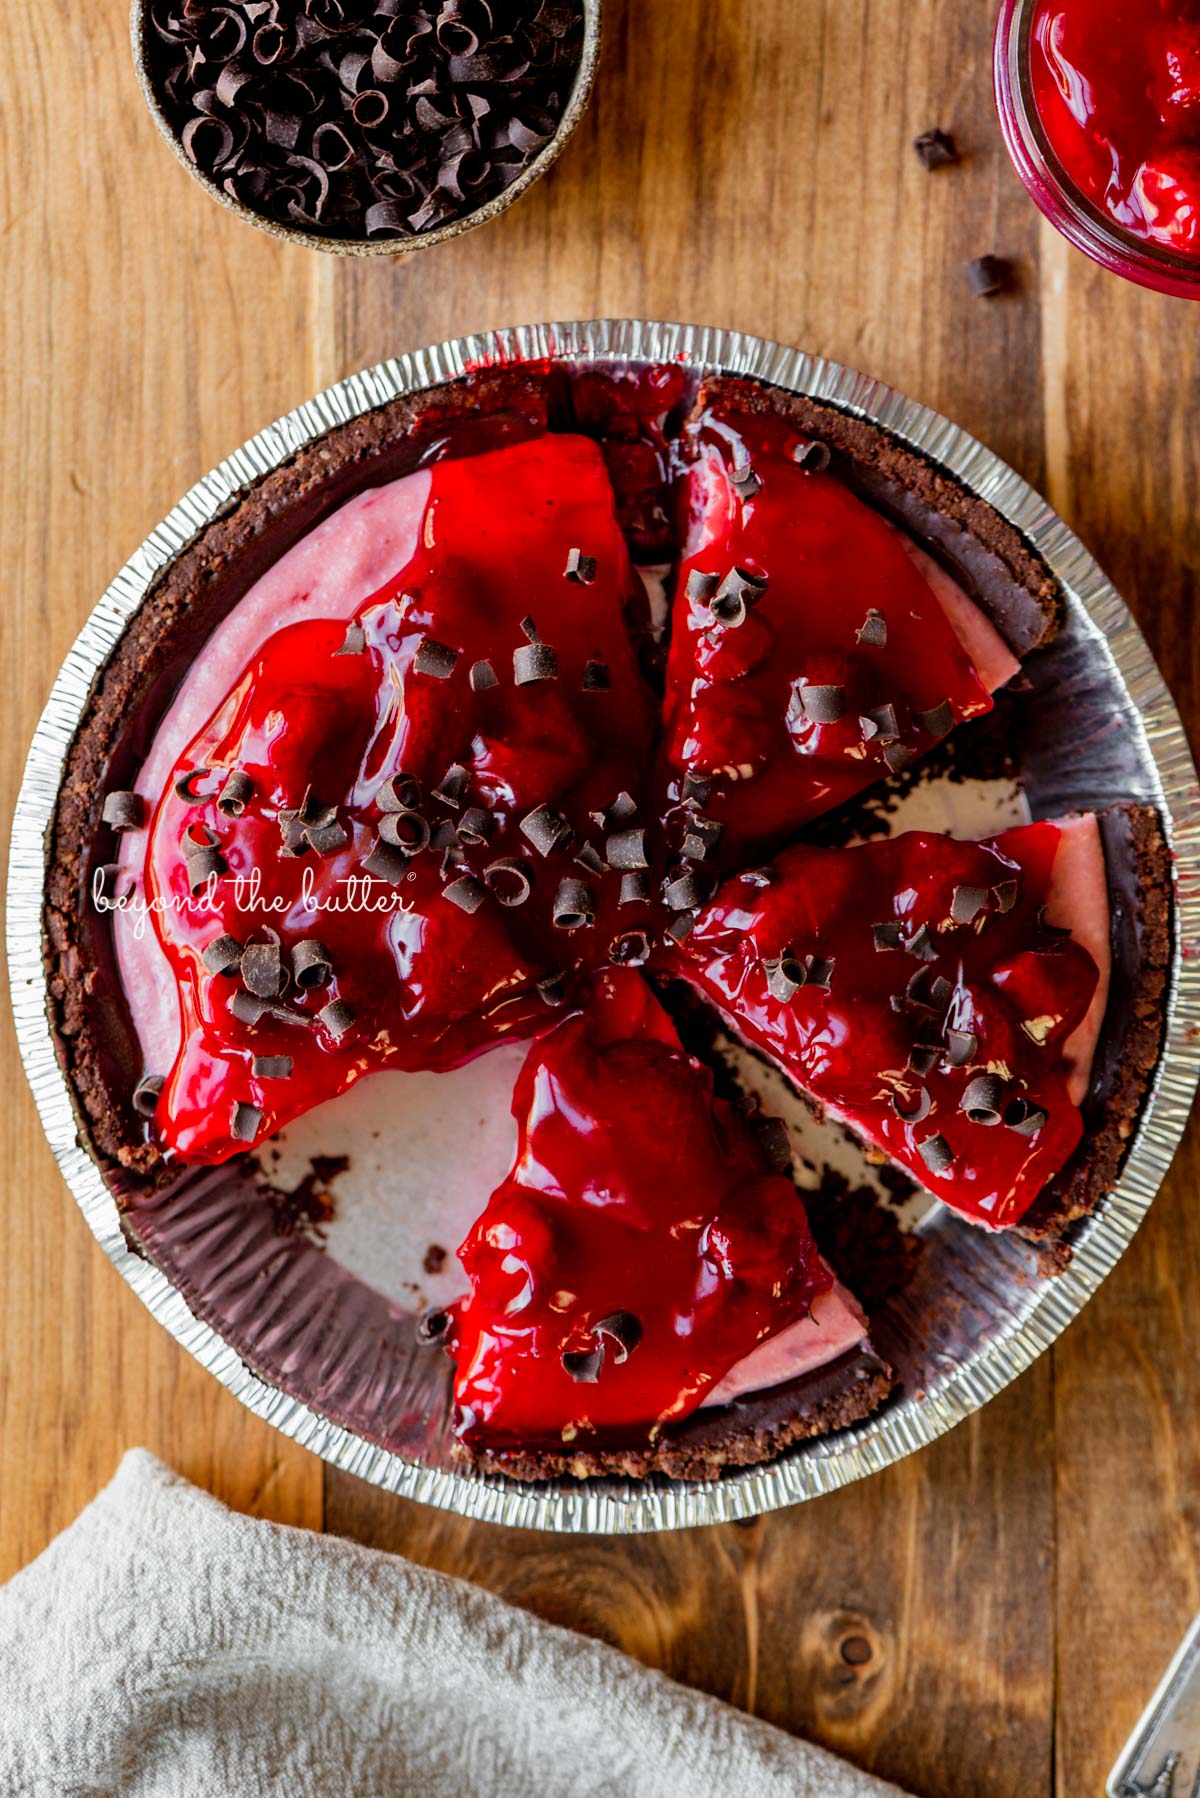 No bake strawberry chocolate pie with small bowl of chocolate curls and extra strawberry pie filling on wood table | All images © Beyond the Butter®